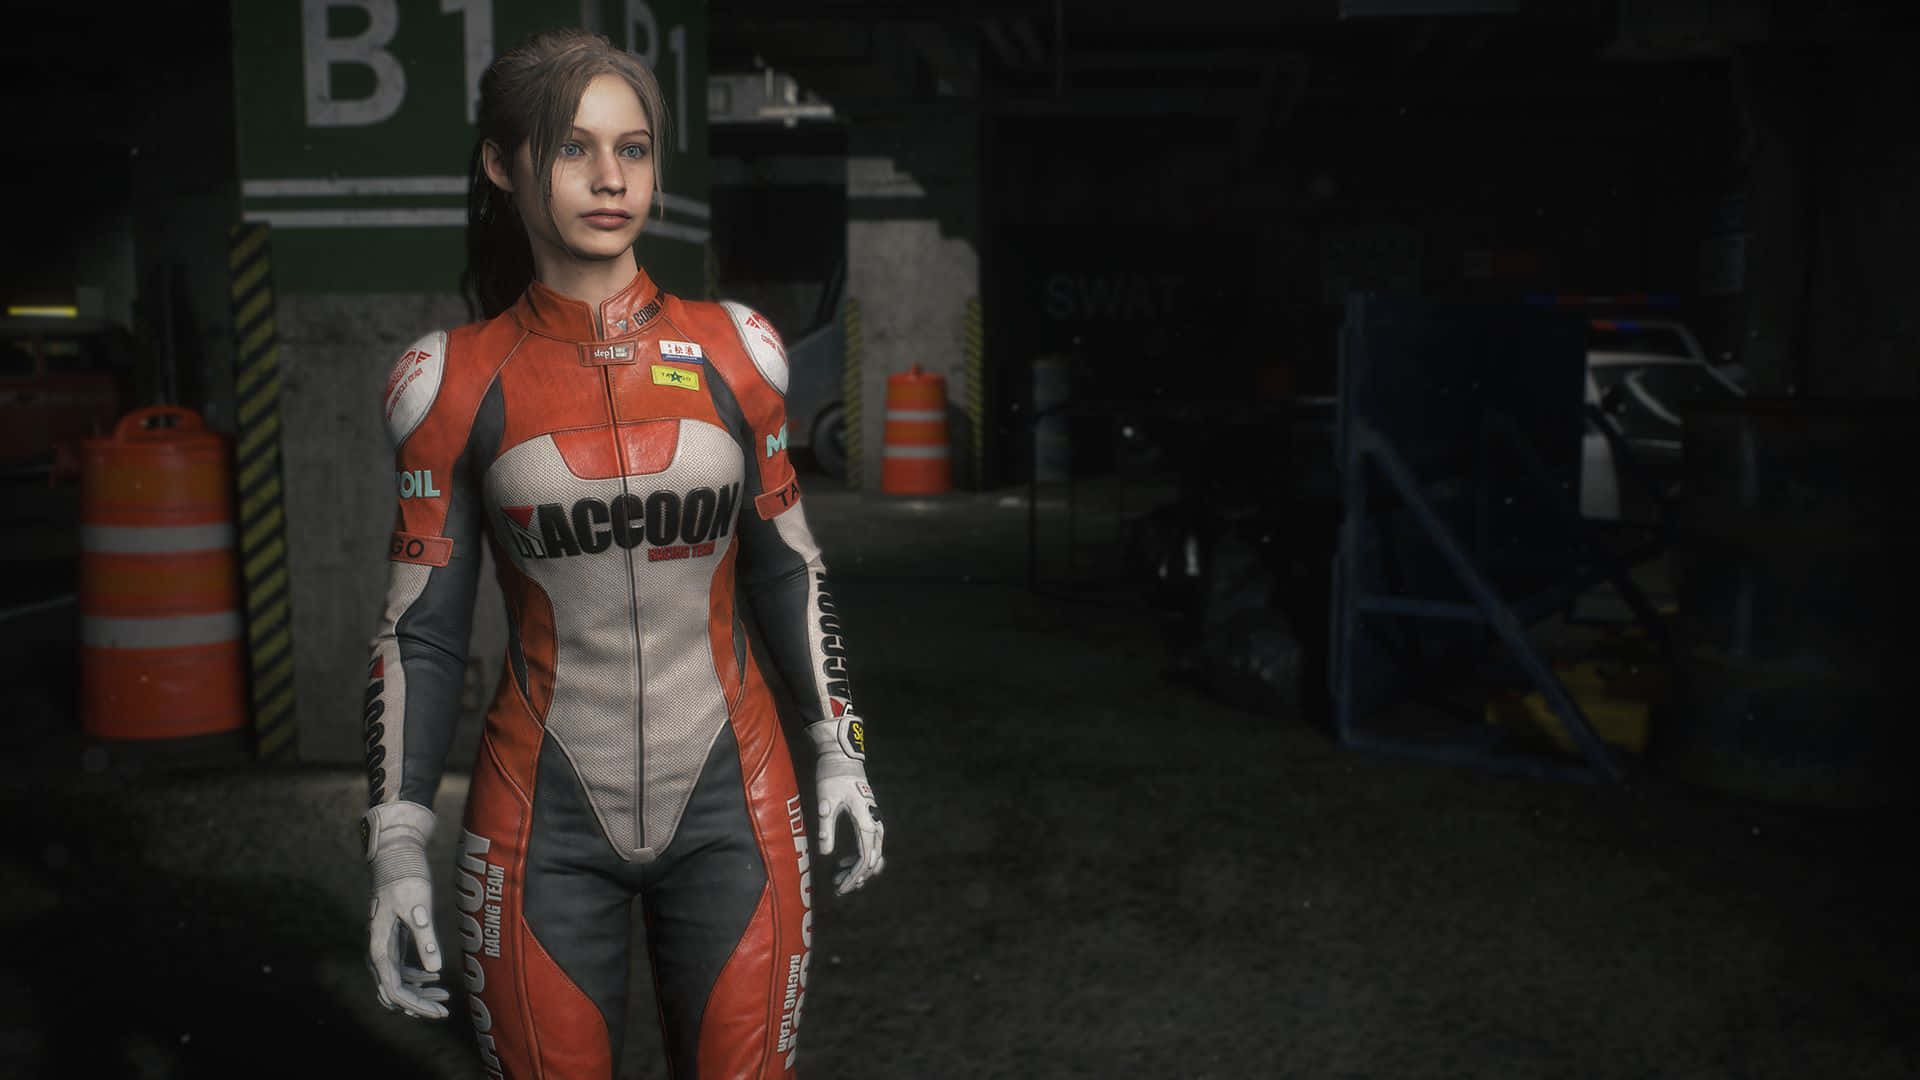 Claireredfield Besucht Raccoon City In Resident Evil 2. Wallpaper